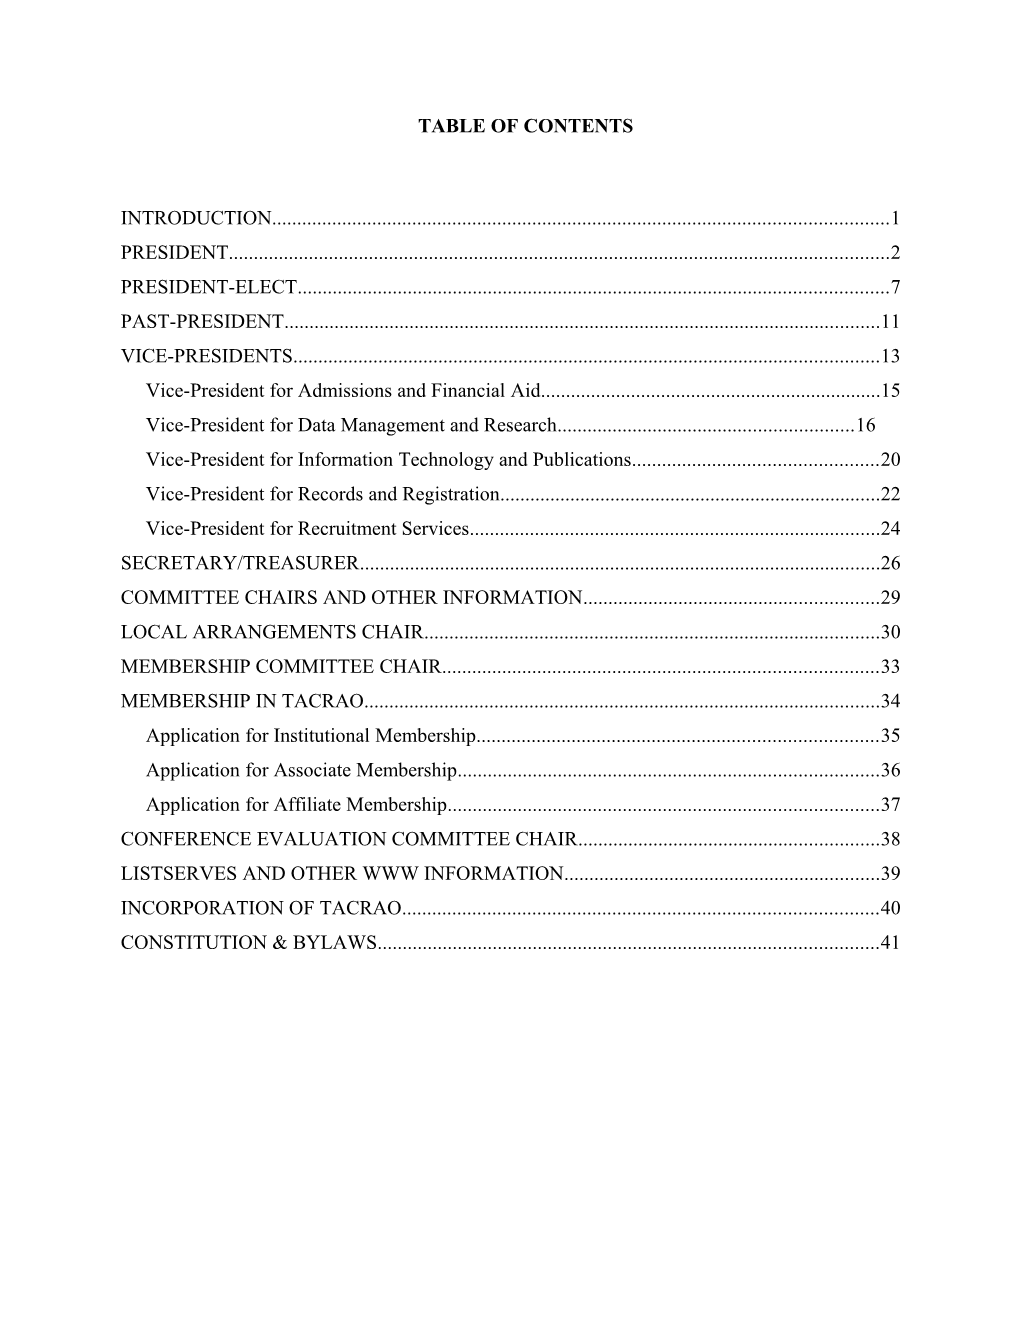 Table of Contents s40